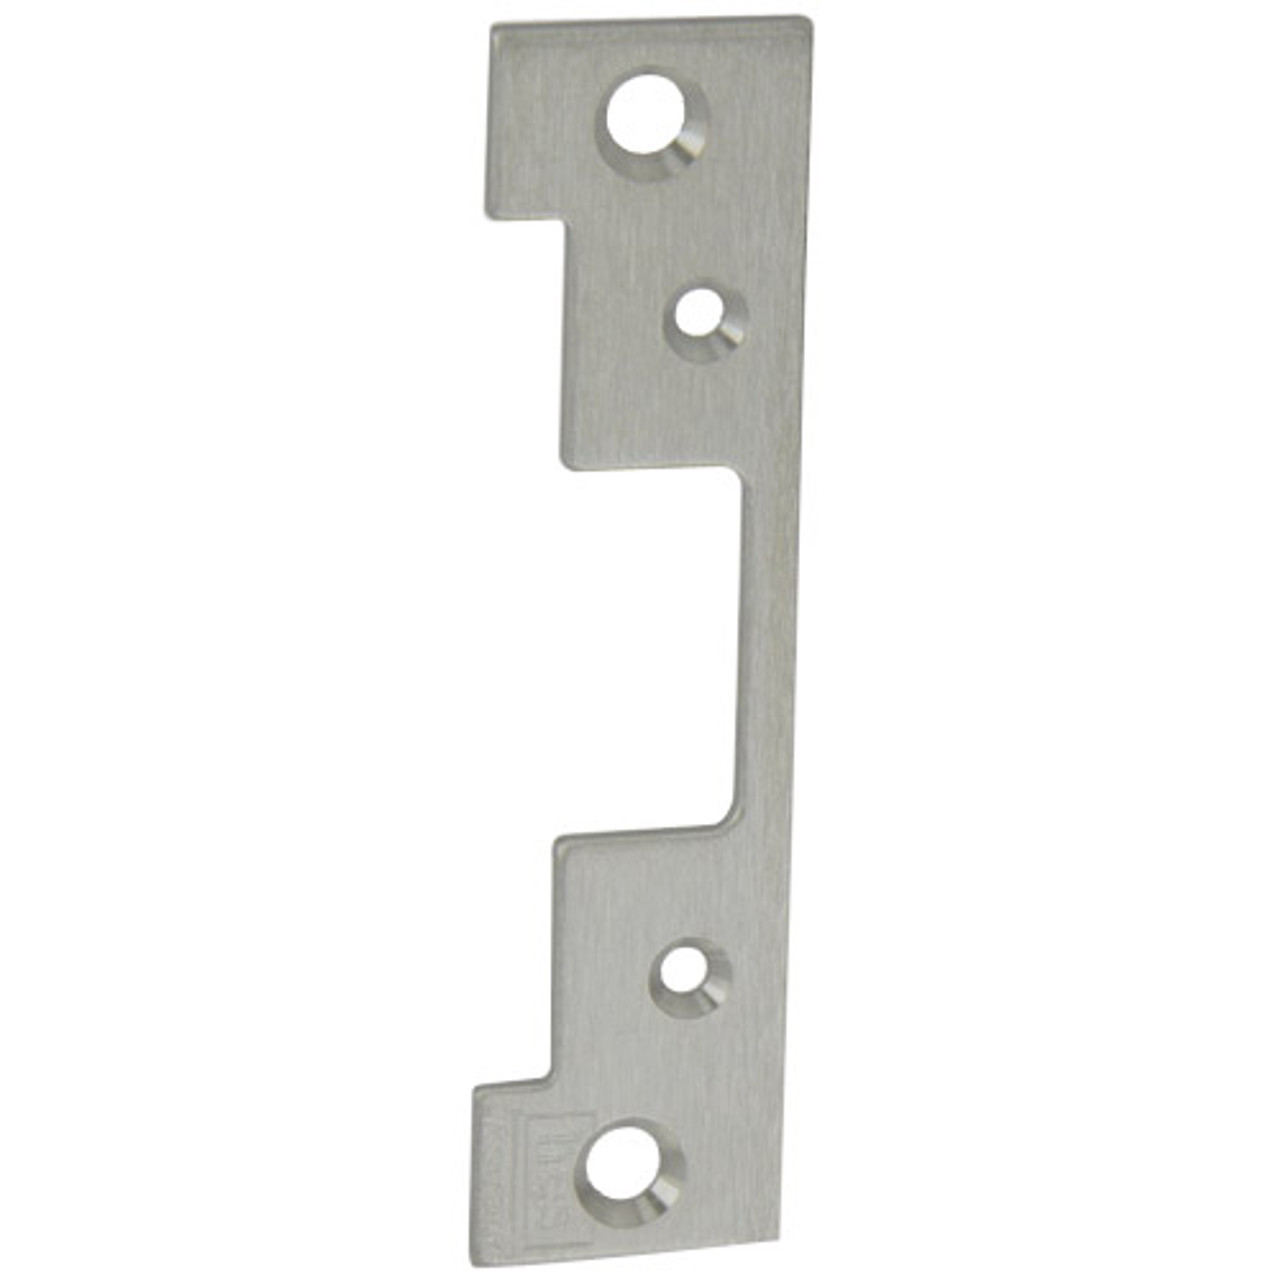 503-630 Hes 6-7/8 x 1-1/4" Faceplate in Satin Stainless Finish